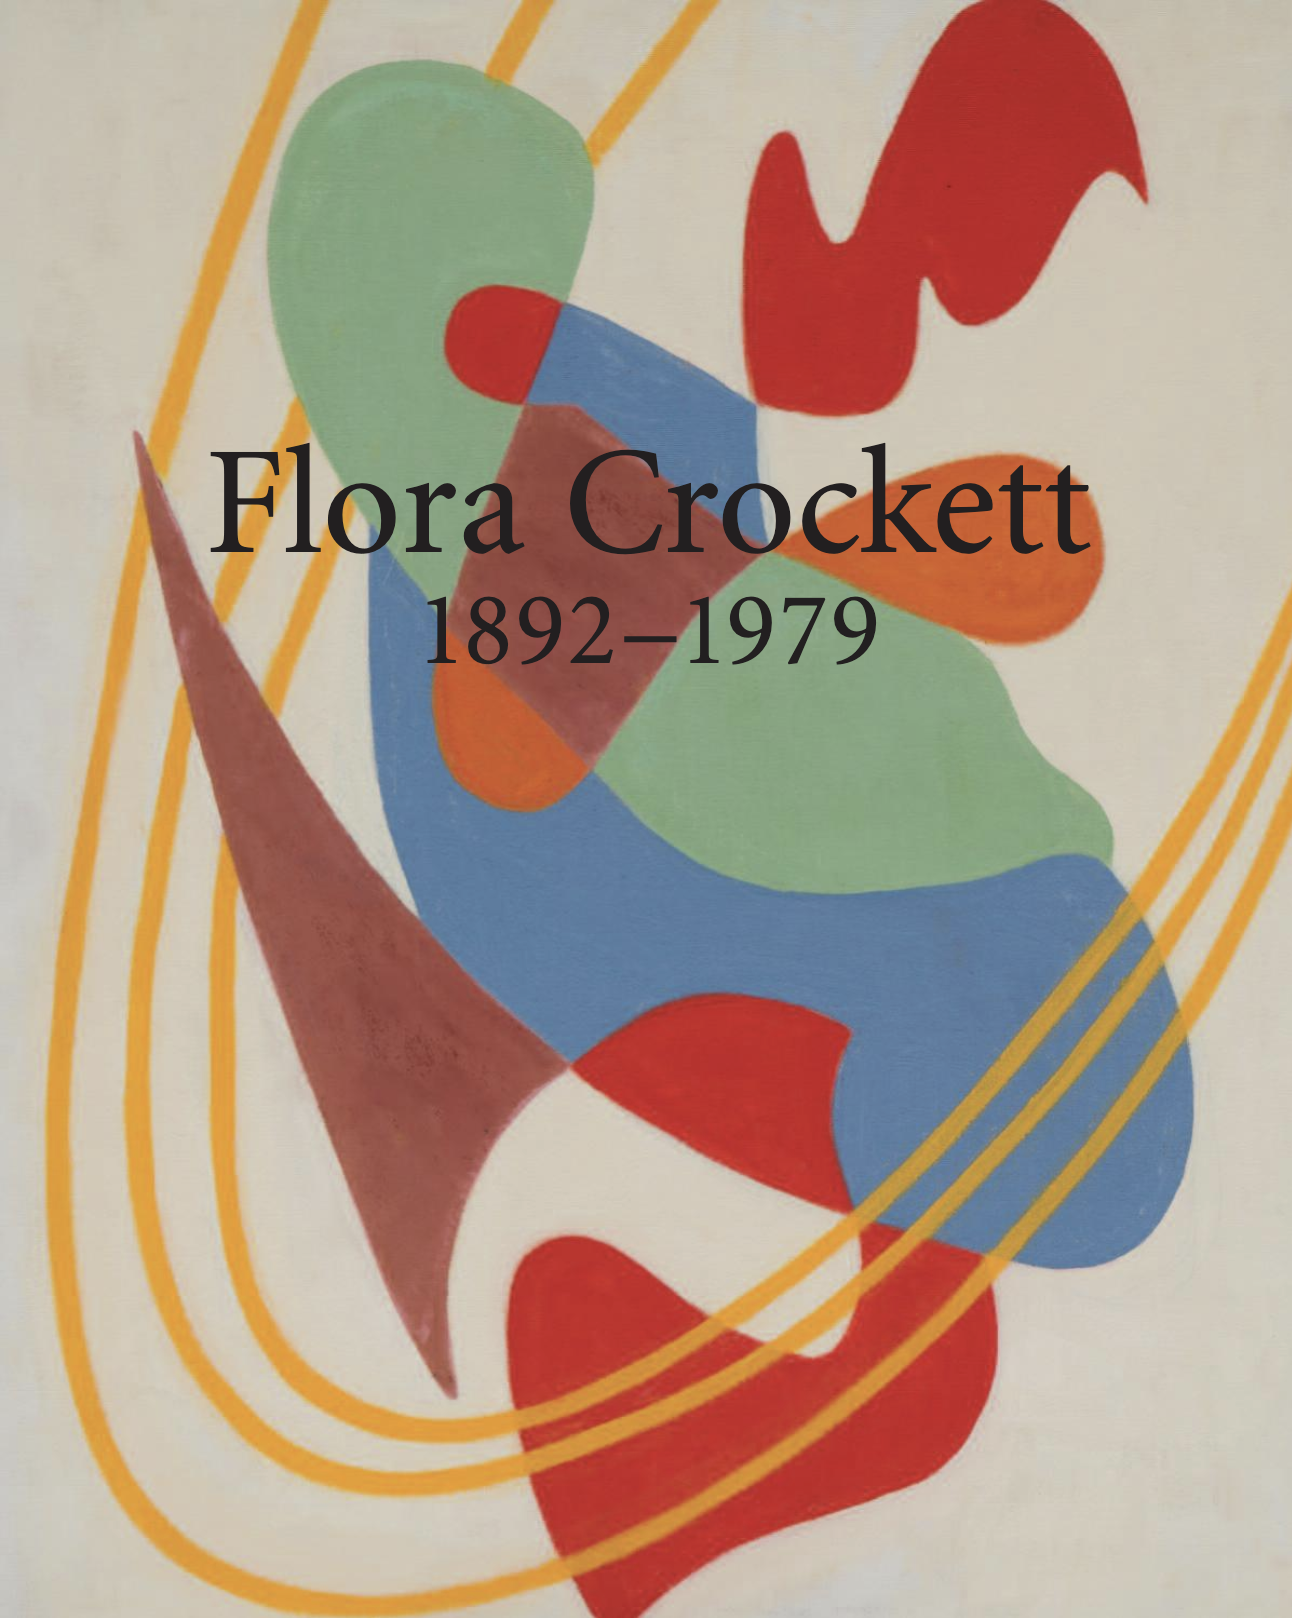 Flora Crockett (1892 -1979) # 2015 &lt;alt="Catalogue cover with title over a geometric abstract painting in white, yellow, blue, green, and reds"&gt; 